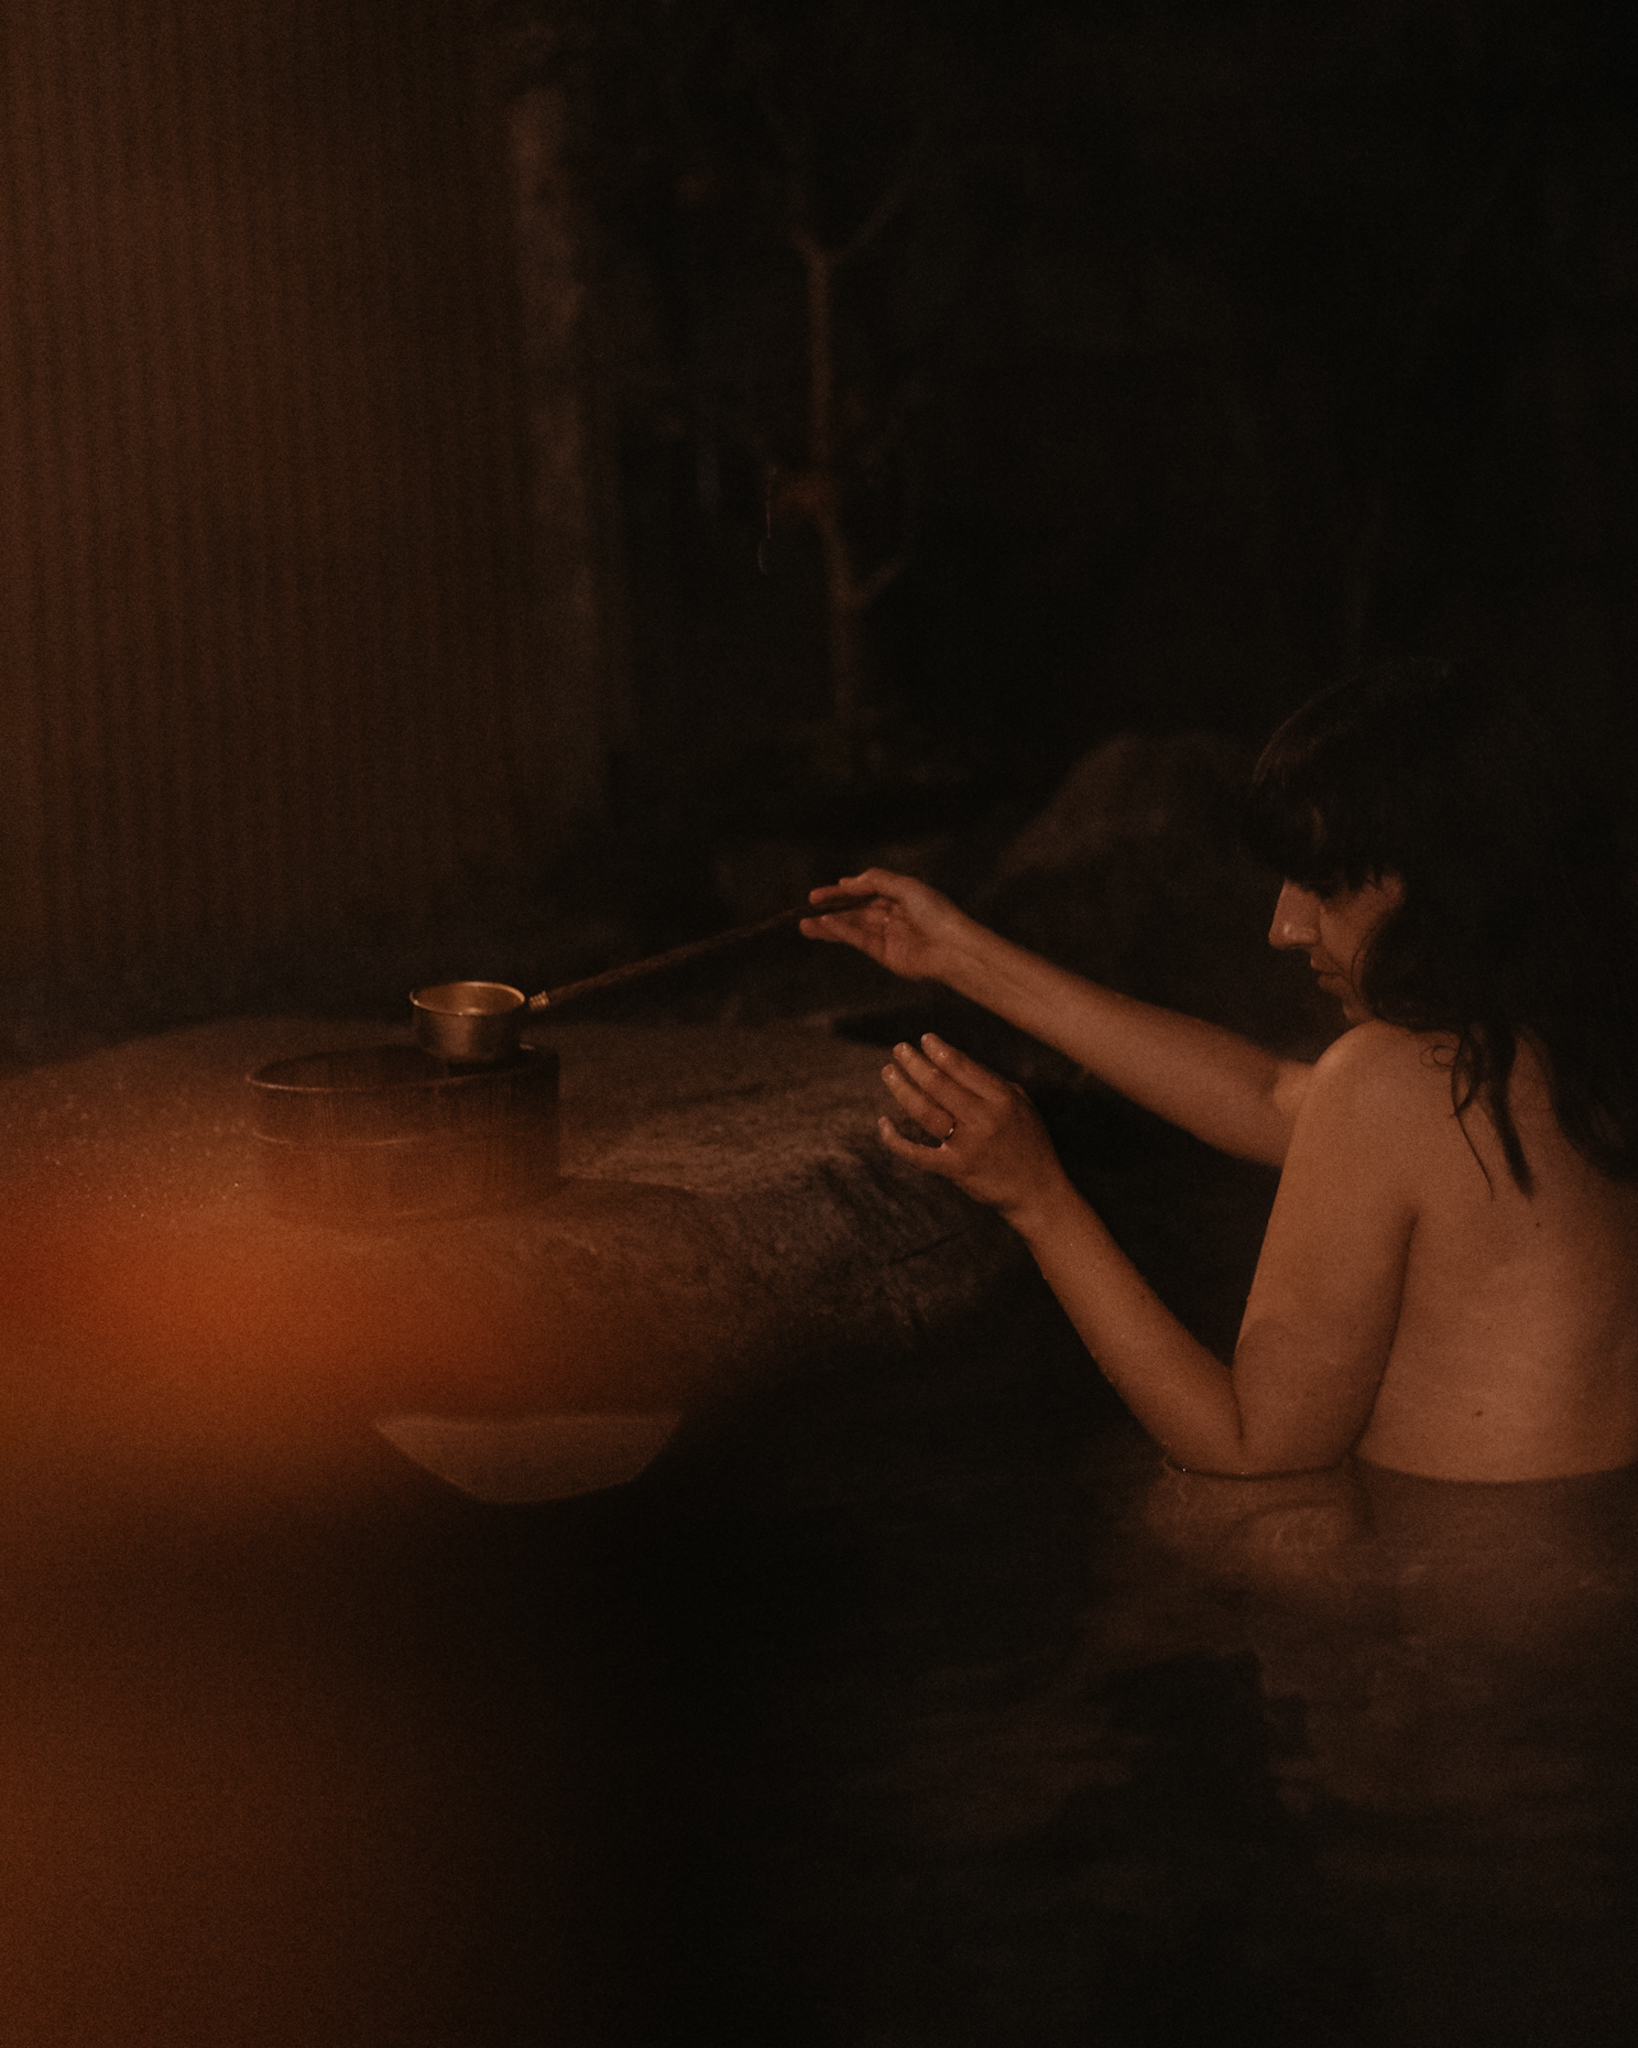 Musouen onsen - The cat, you and us